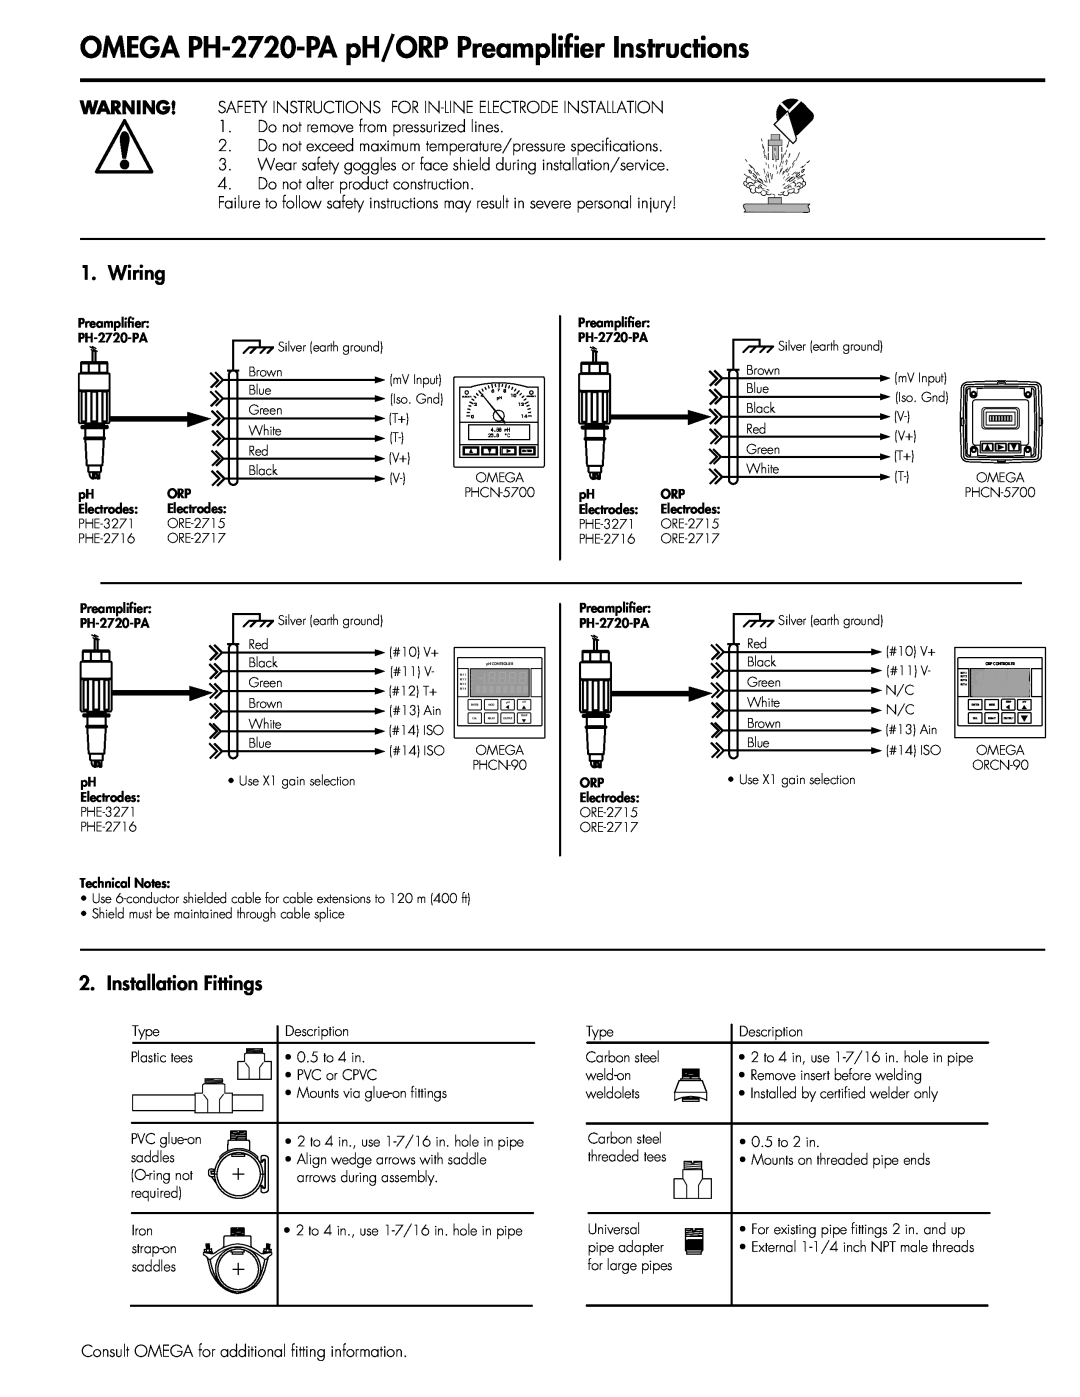 Omega Speaker Systems manual Wiring, Installation Fittings, OMEGA PH-2720-PApH/ORP Preamplifier Instructions 